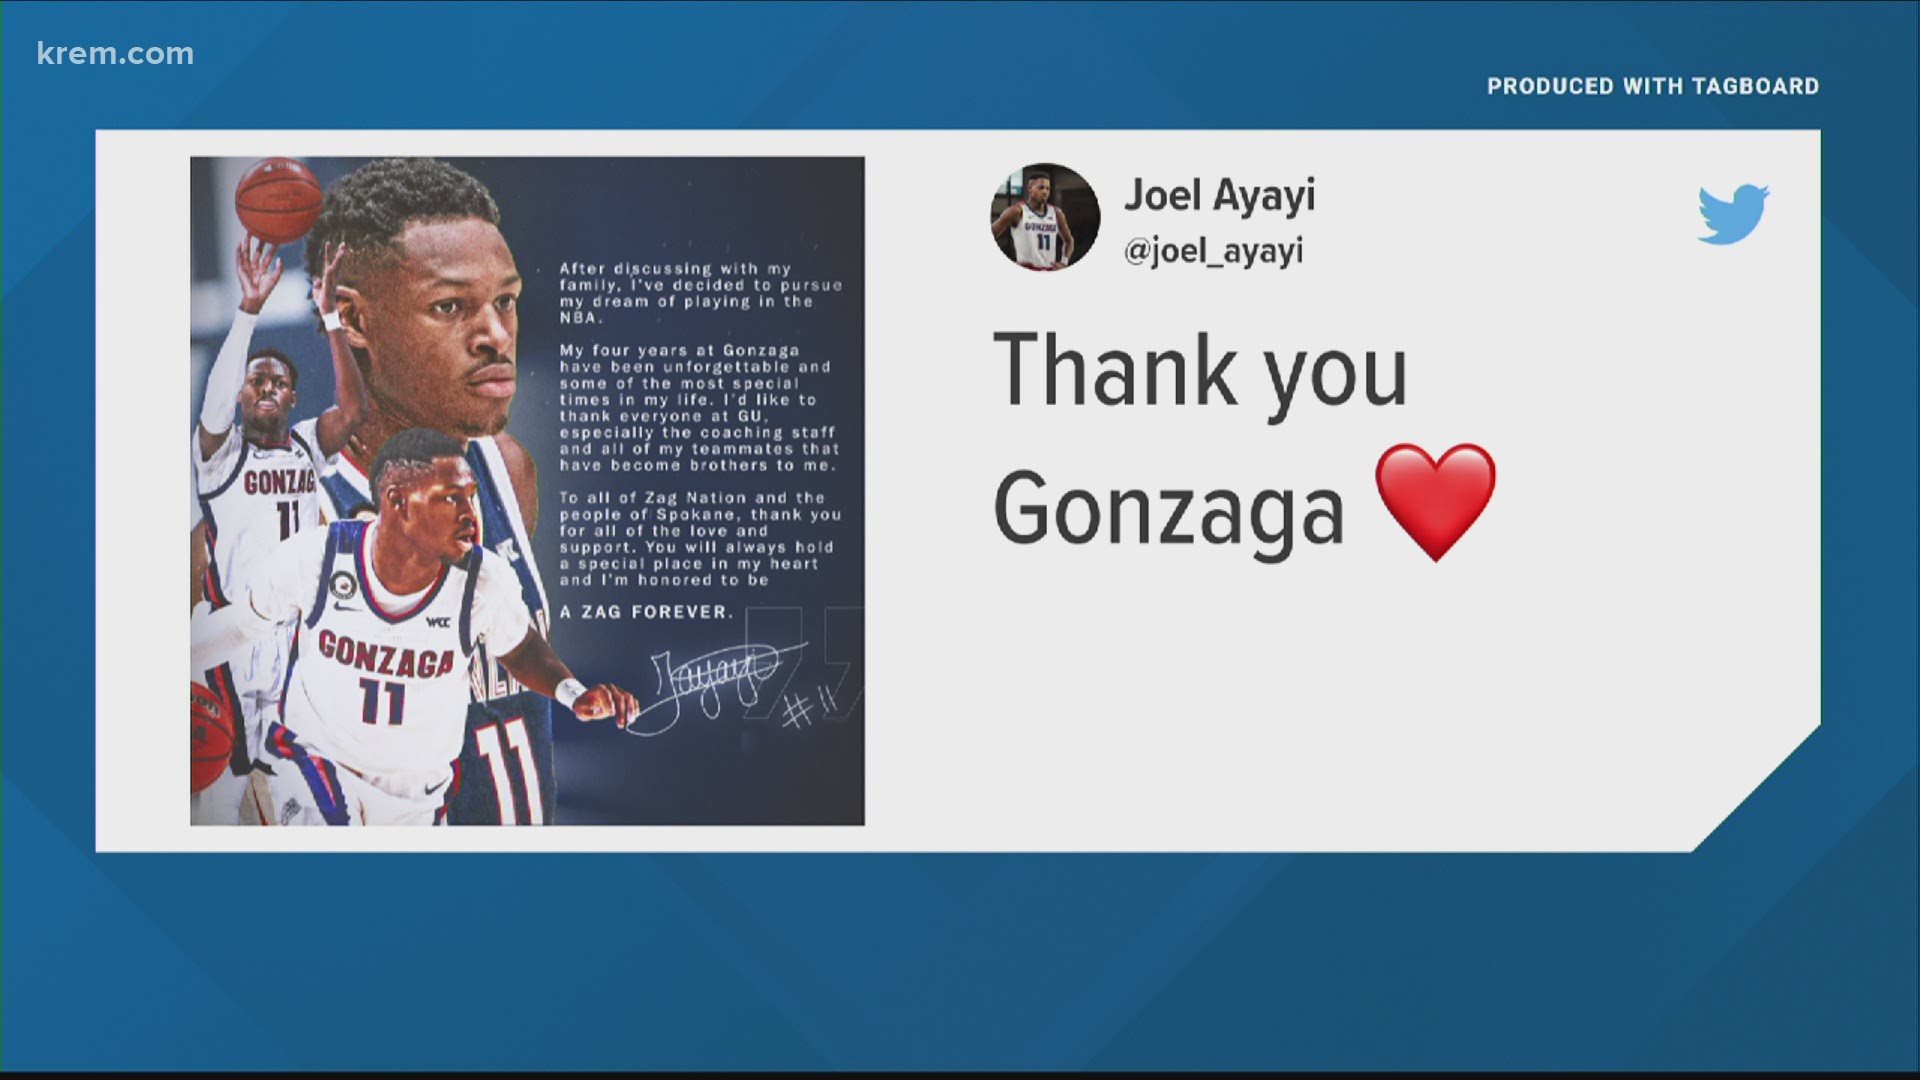 Ayayi thanked his team and Gonzaga fans in post about entering the NBA draft.